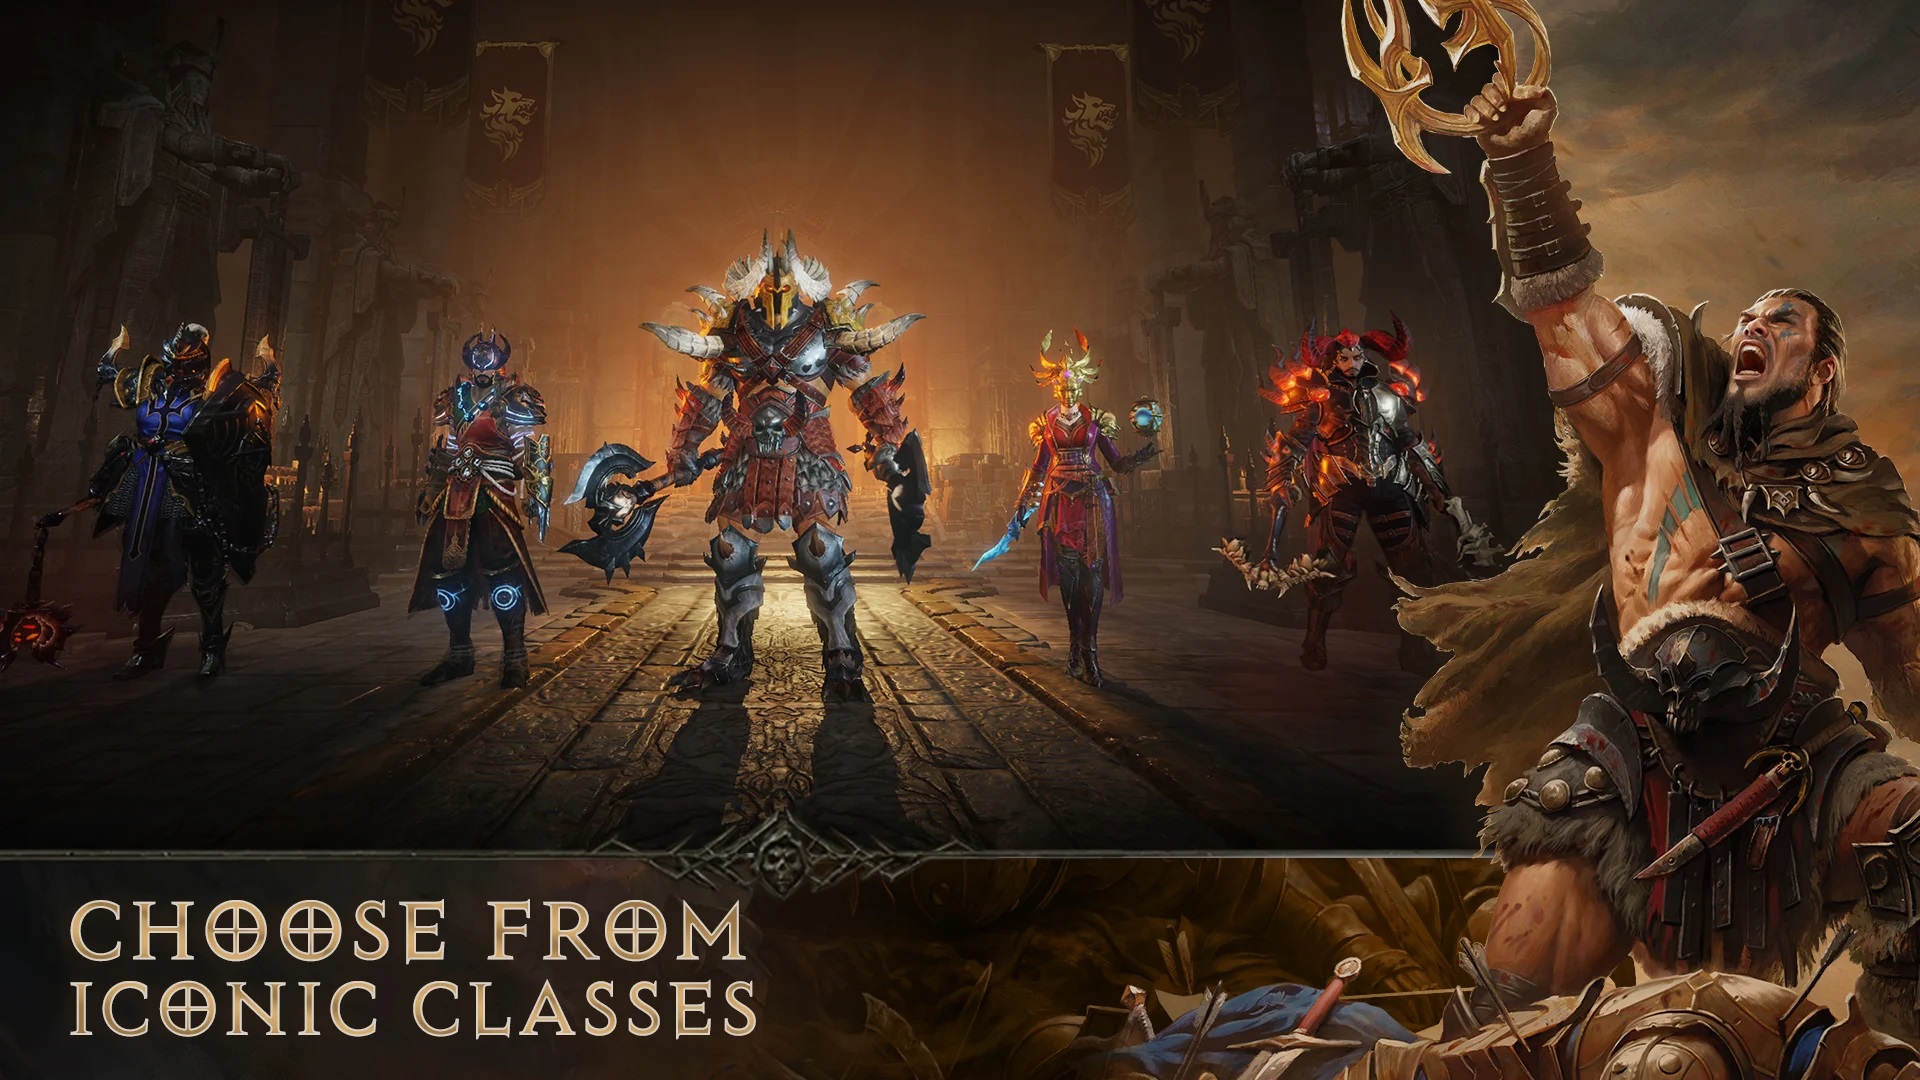 Diablo Immortal - Release Date, Classes, Gearing, and Everything Else You Need to Know About Blizzard’s New Game